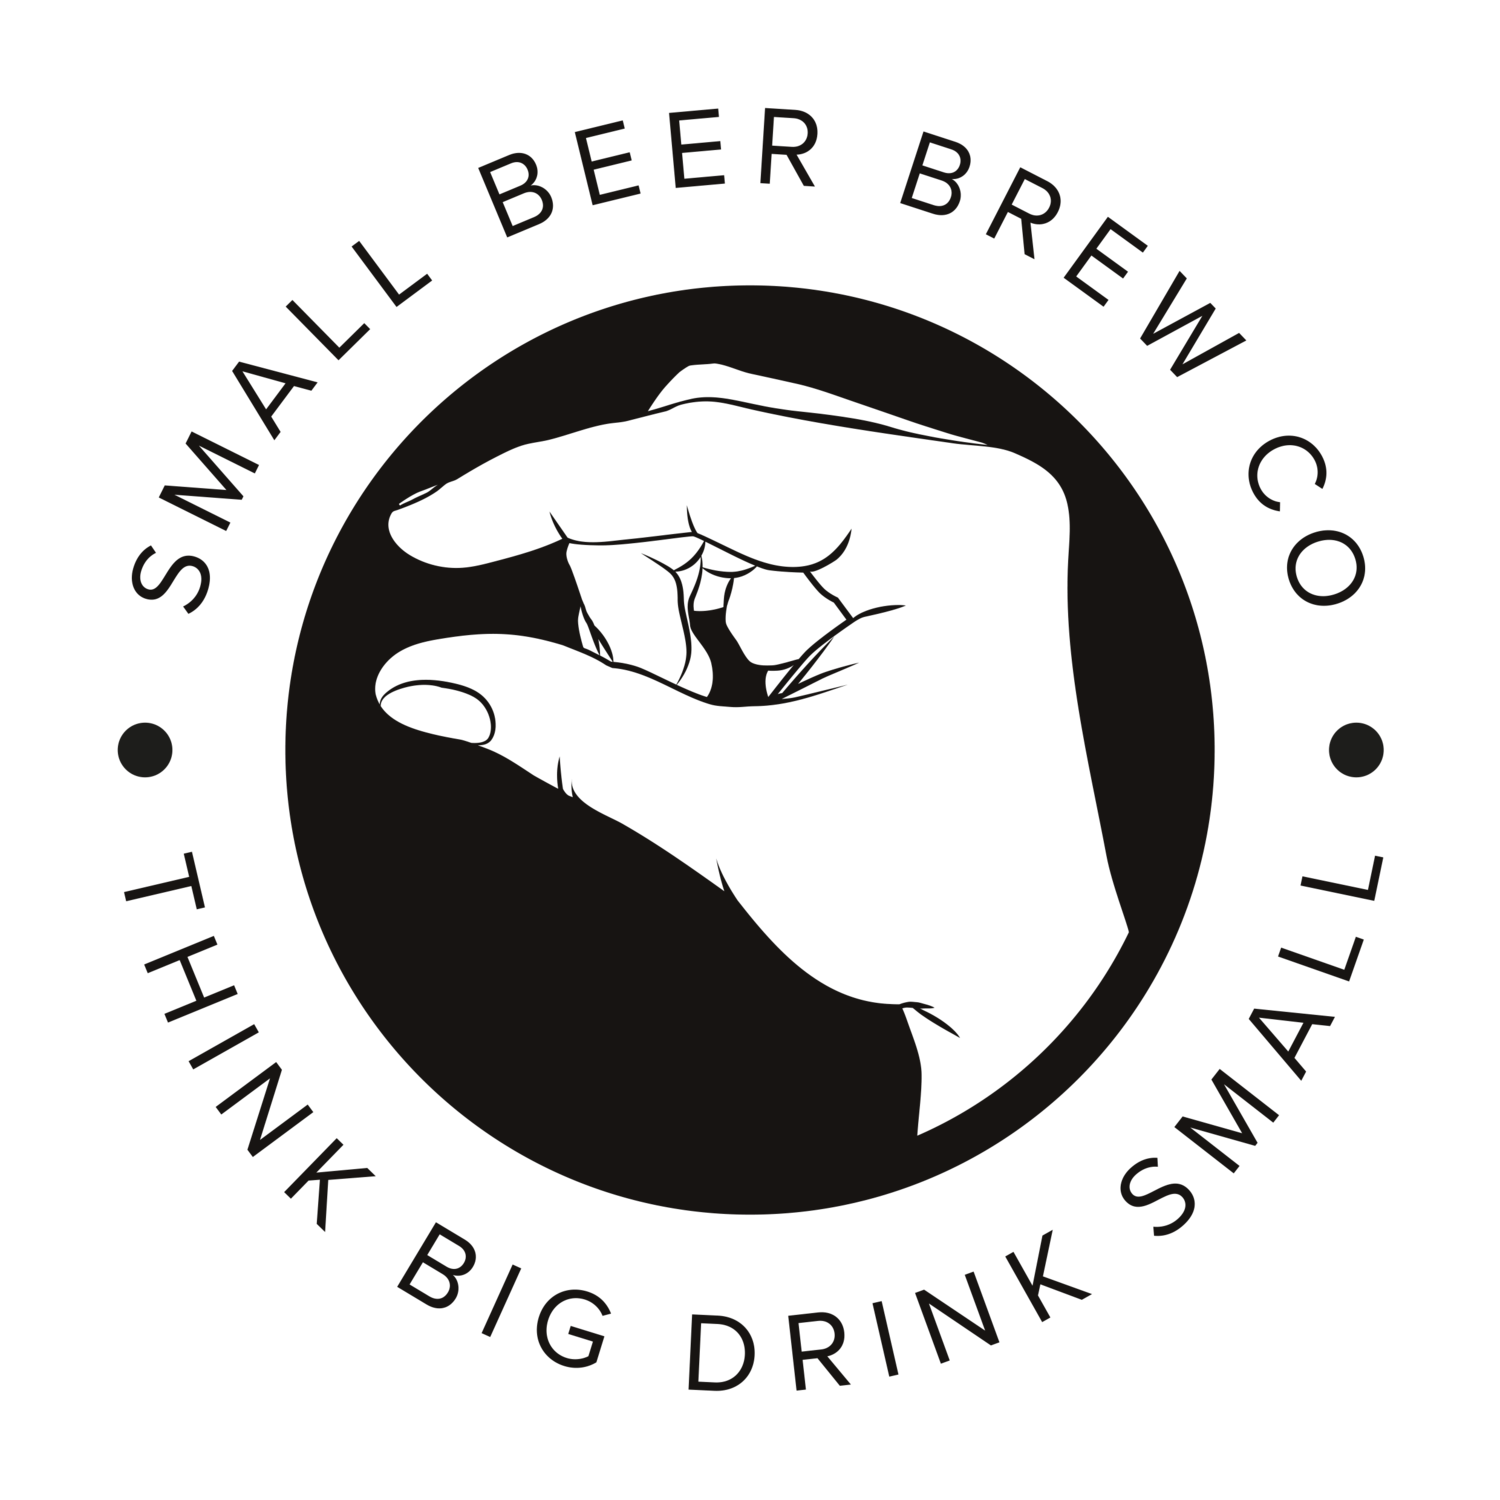 Hand Beer Logo - SMALL BEER BREW CO.